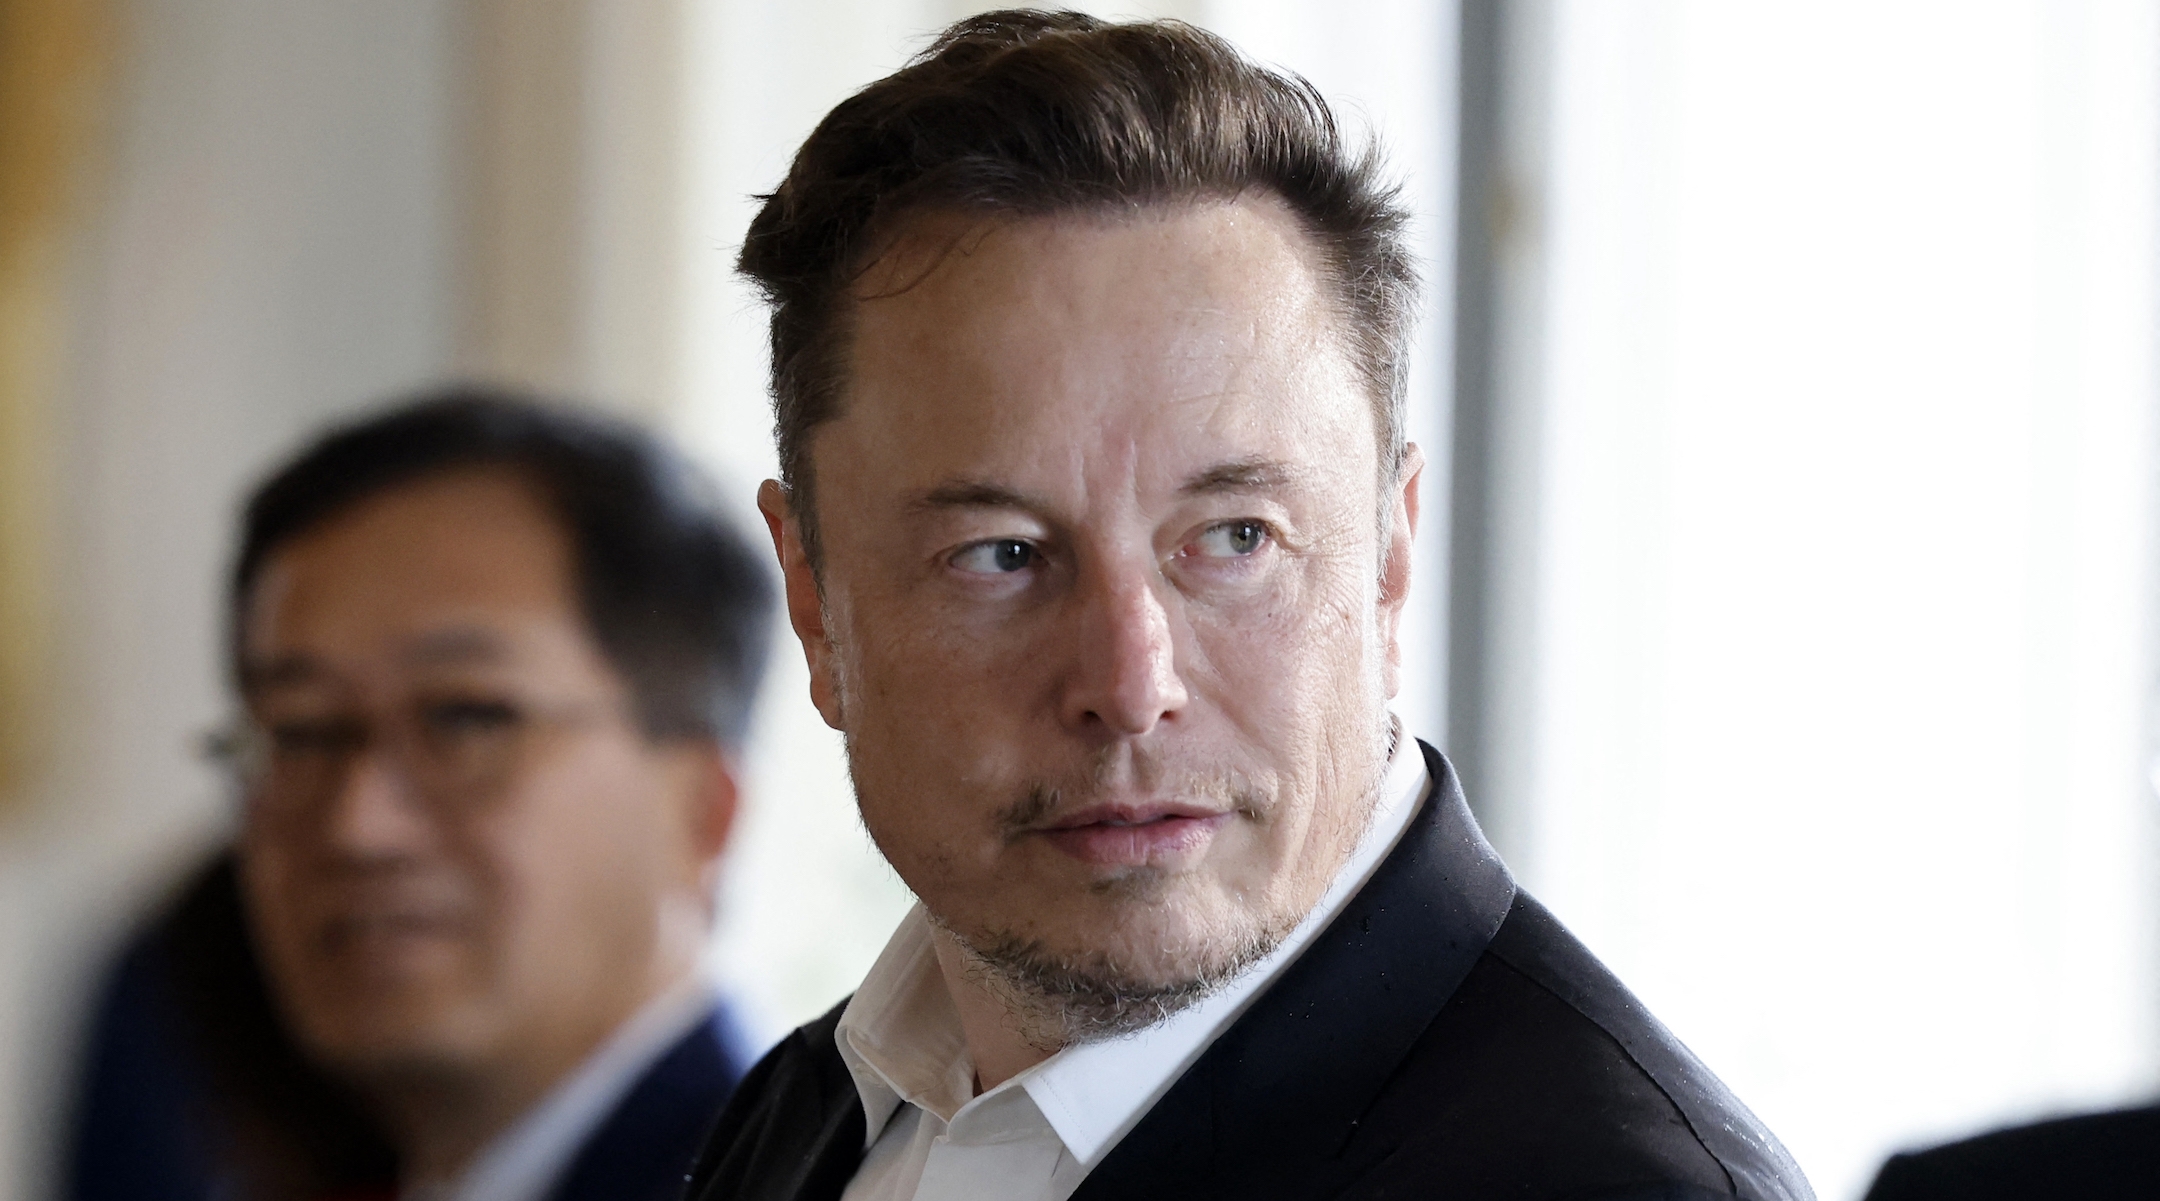 Israeli health ministry calls out Elon Musk for sharing 'fake news' on COVID-19